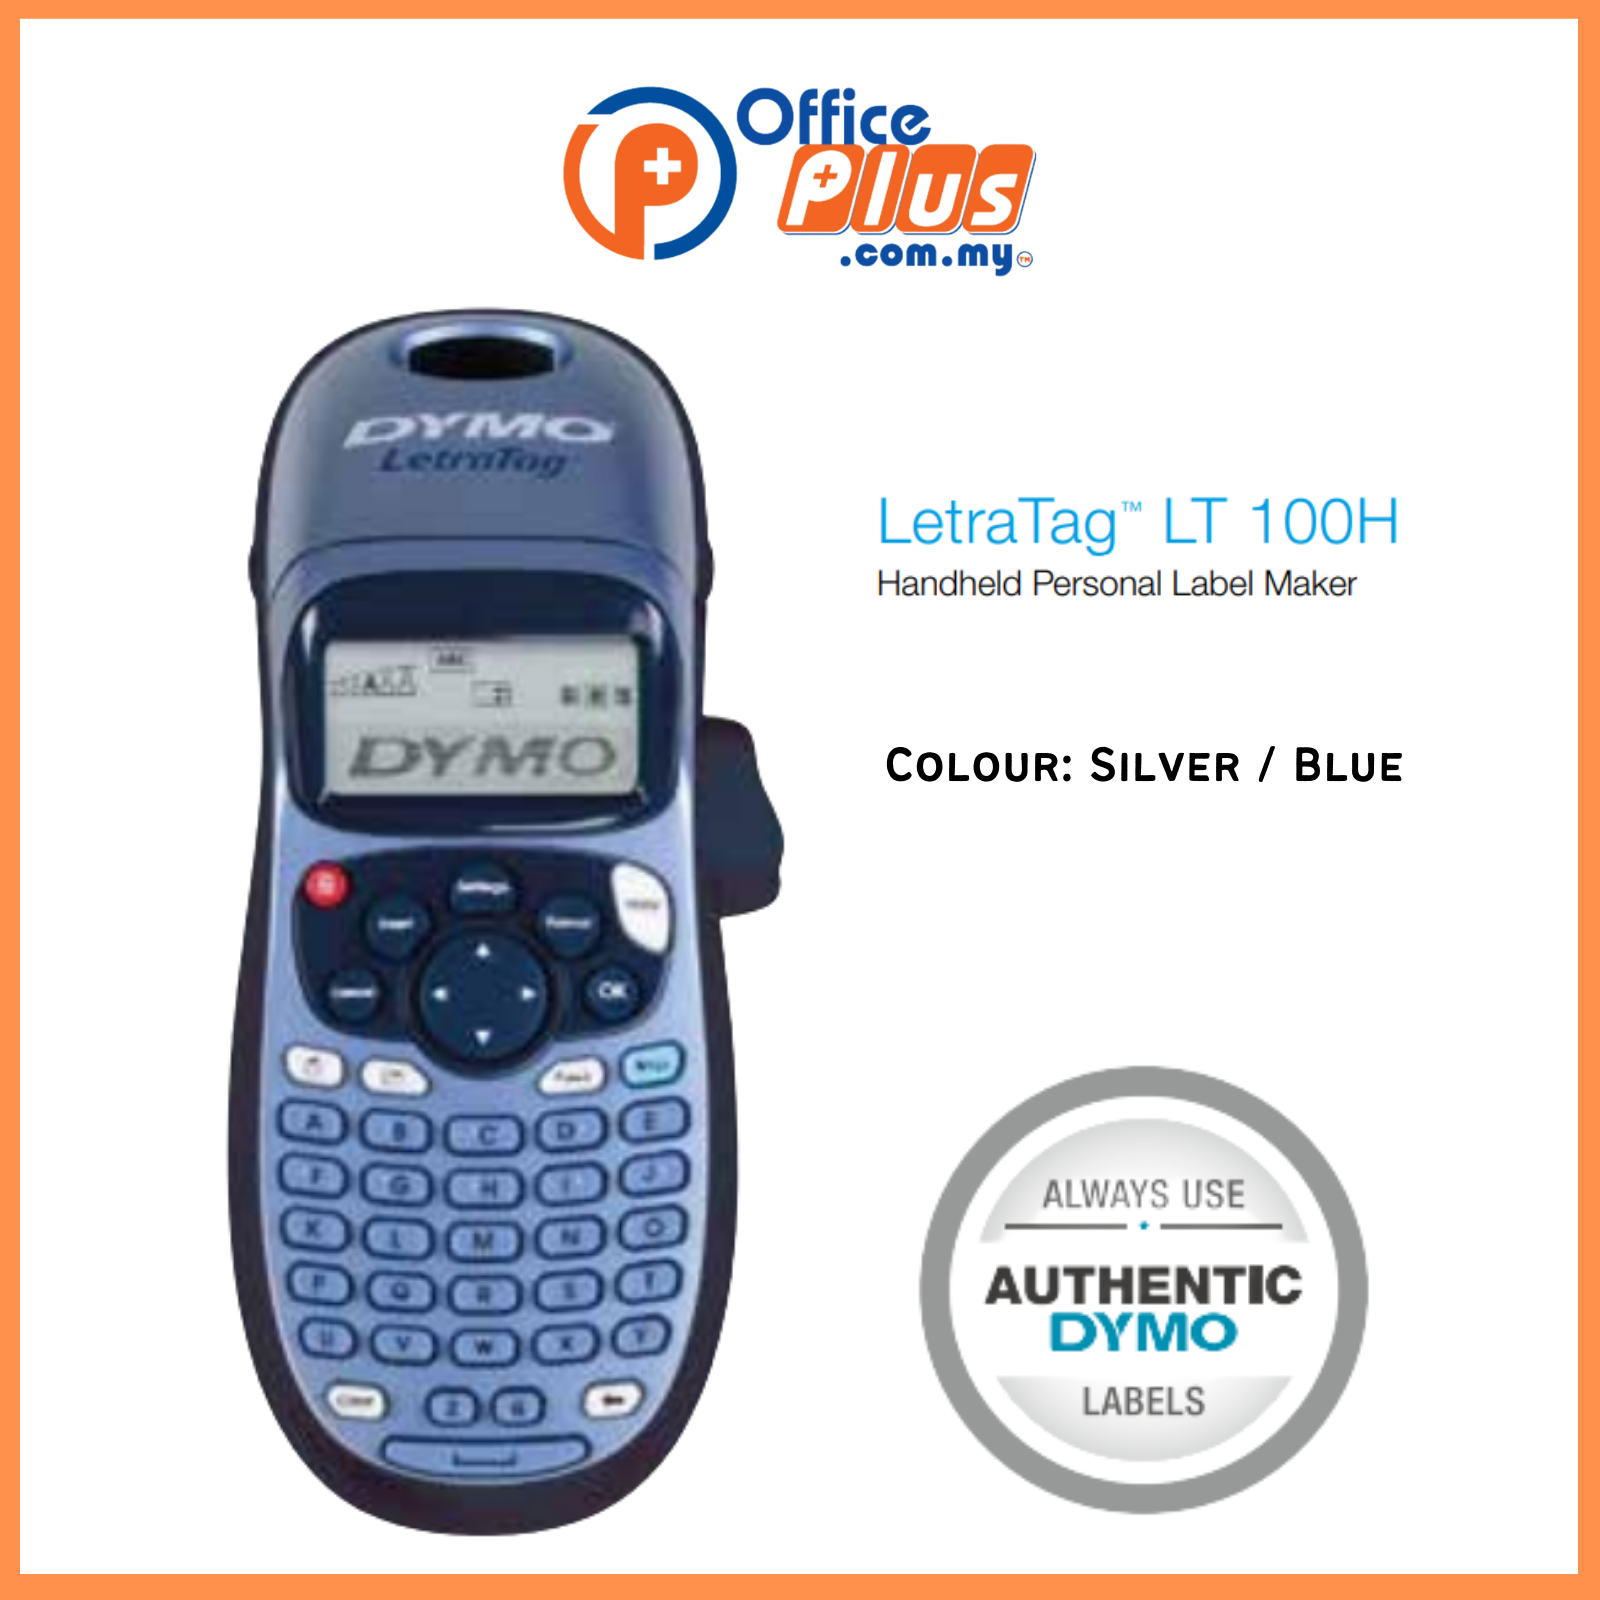 Dymo LetraTag Plus LT-100H Handheld Personal Label Manager